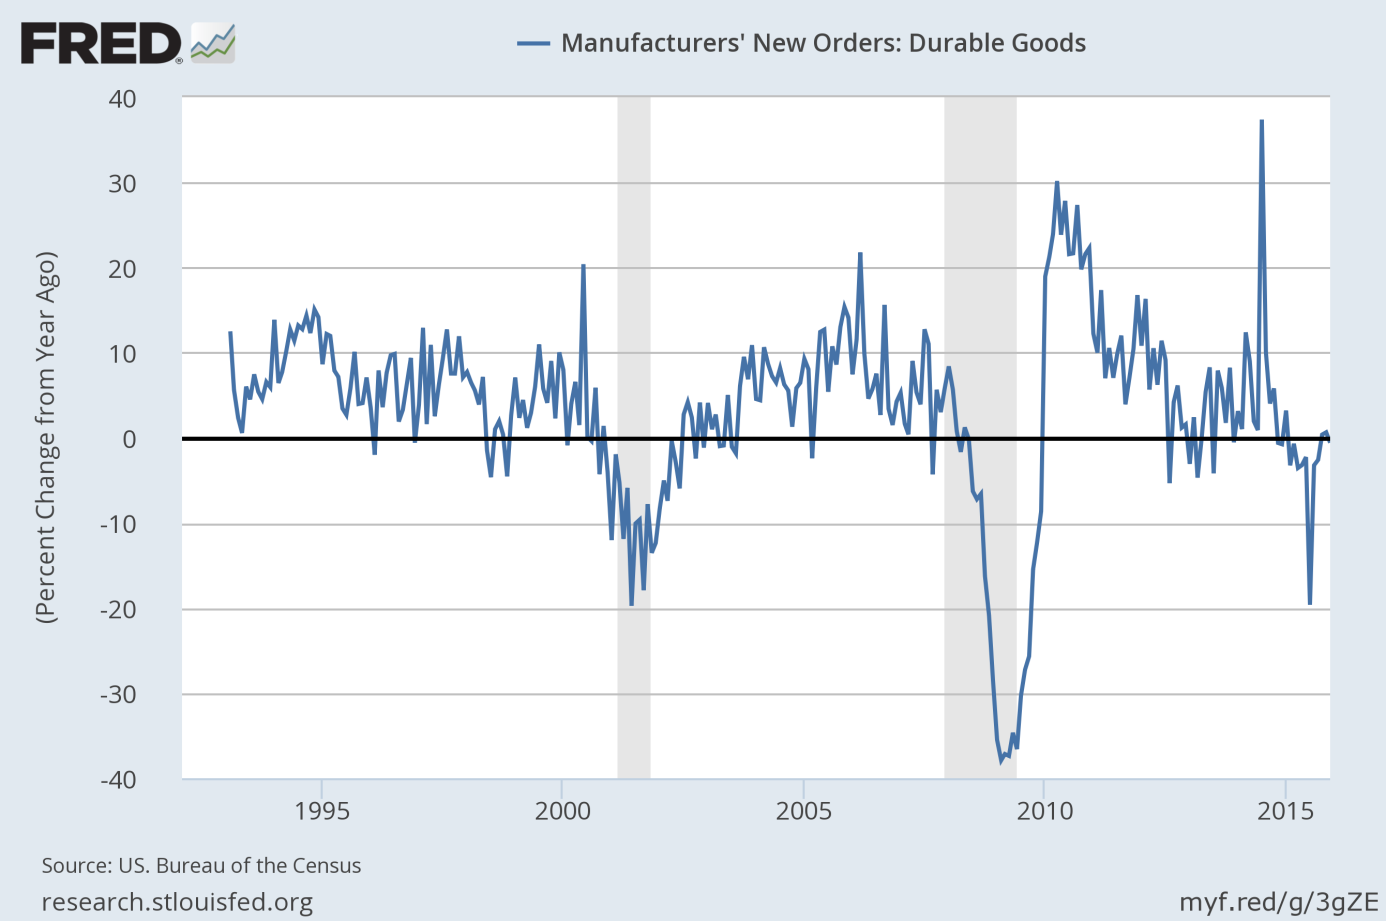 Manufacturer’s New Orders for Durable Goods from 1992 to 2015.